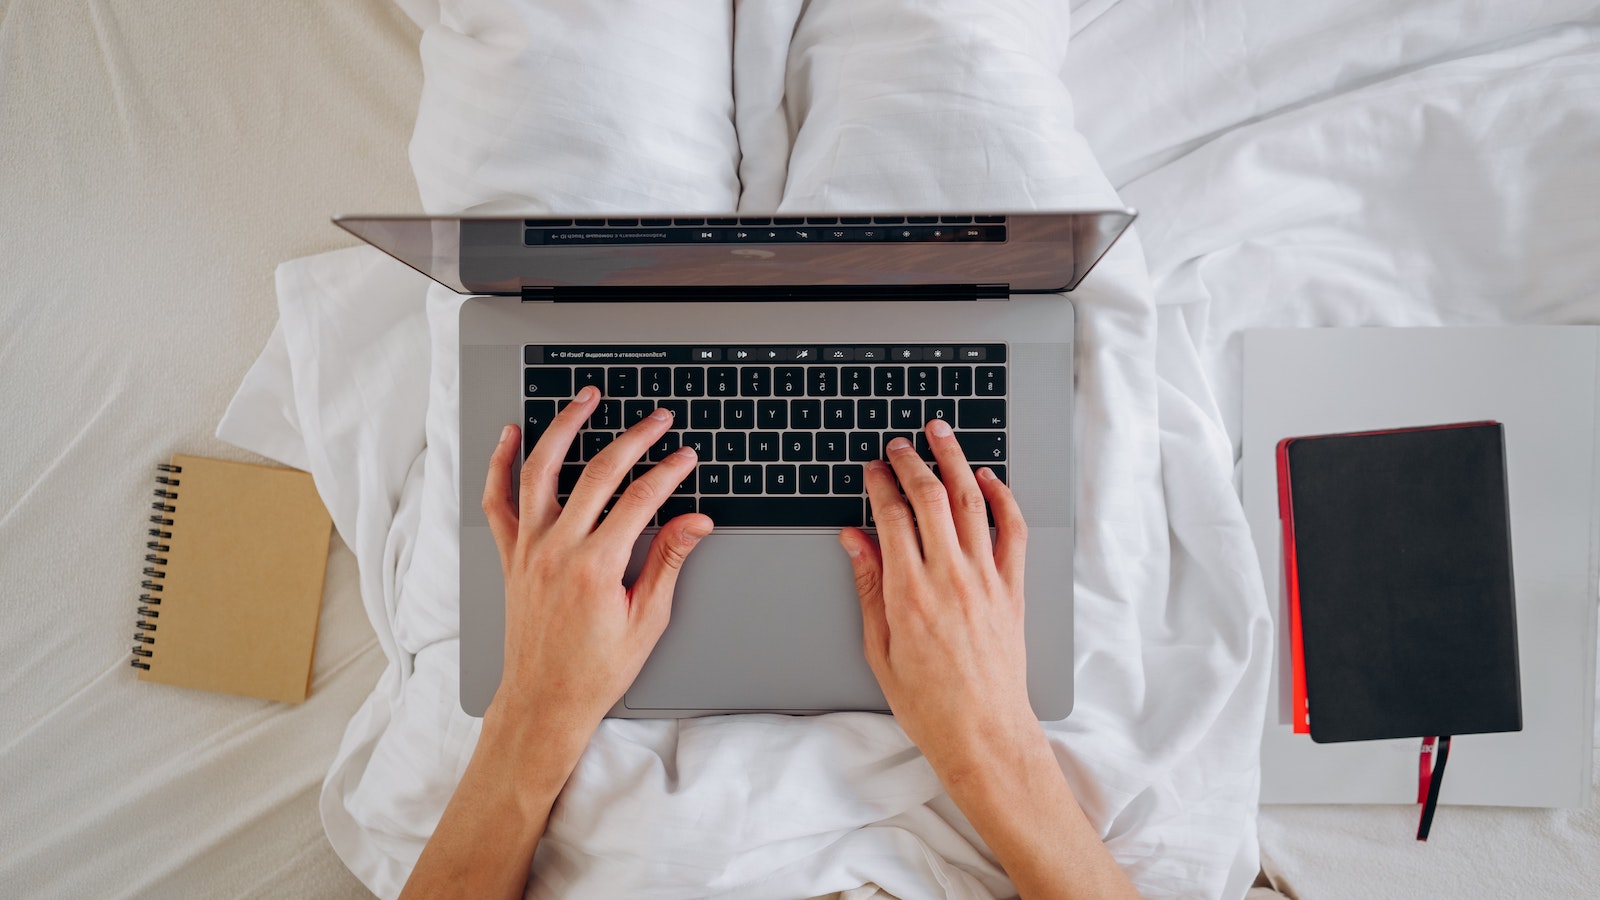 Person in bed typing on a laptop